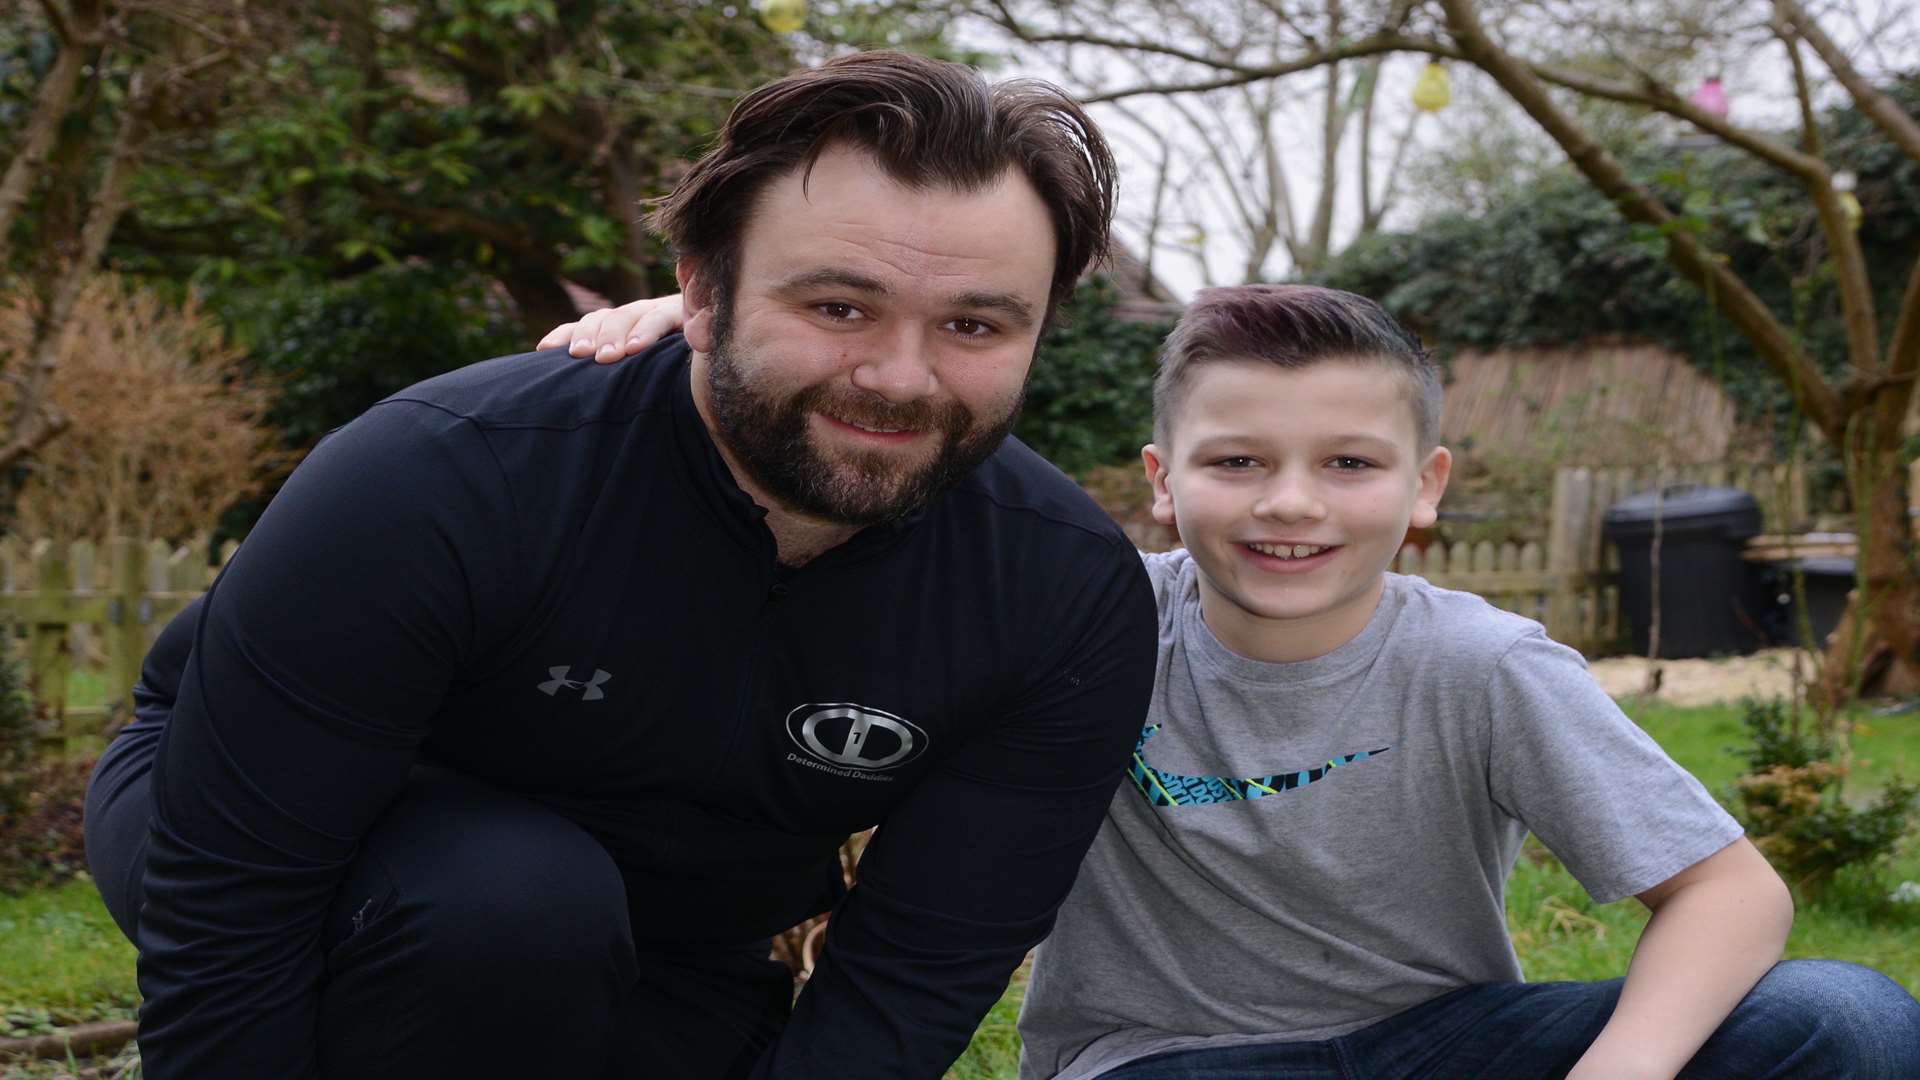 Lee Wenham who is running 10km for 365 days for his son Cellan who has diabetes type 1